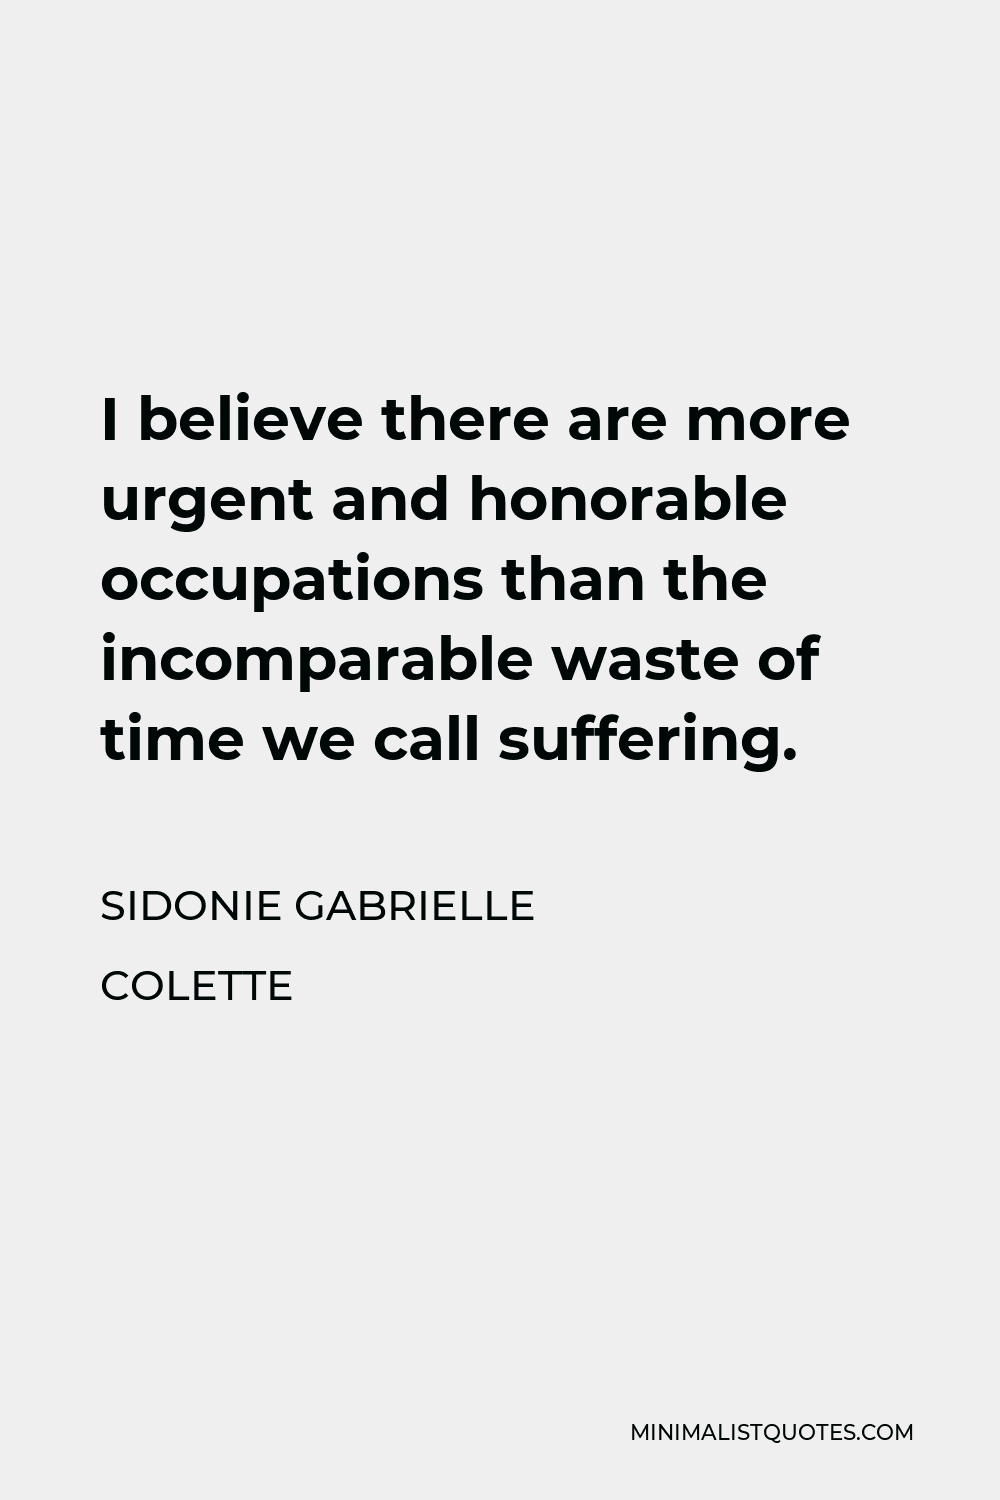 Sidonie Gabrielle Colette Quote - I believe there are more urgent and honorable occupations than the incomparable waste of time we call suffering.